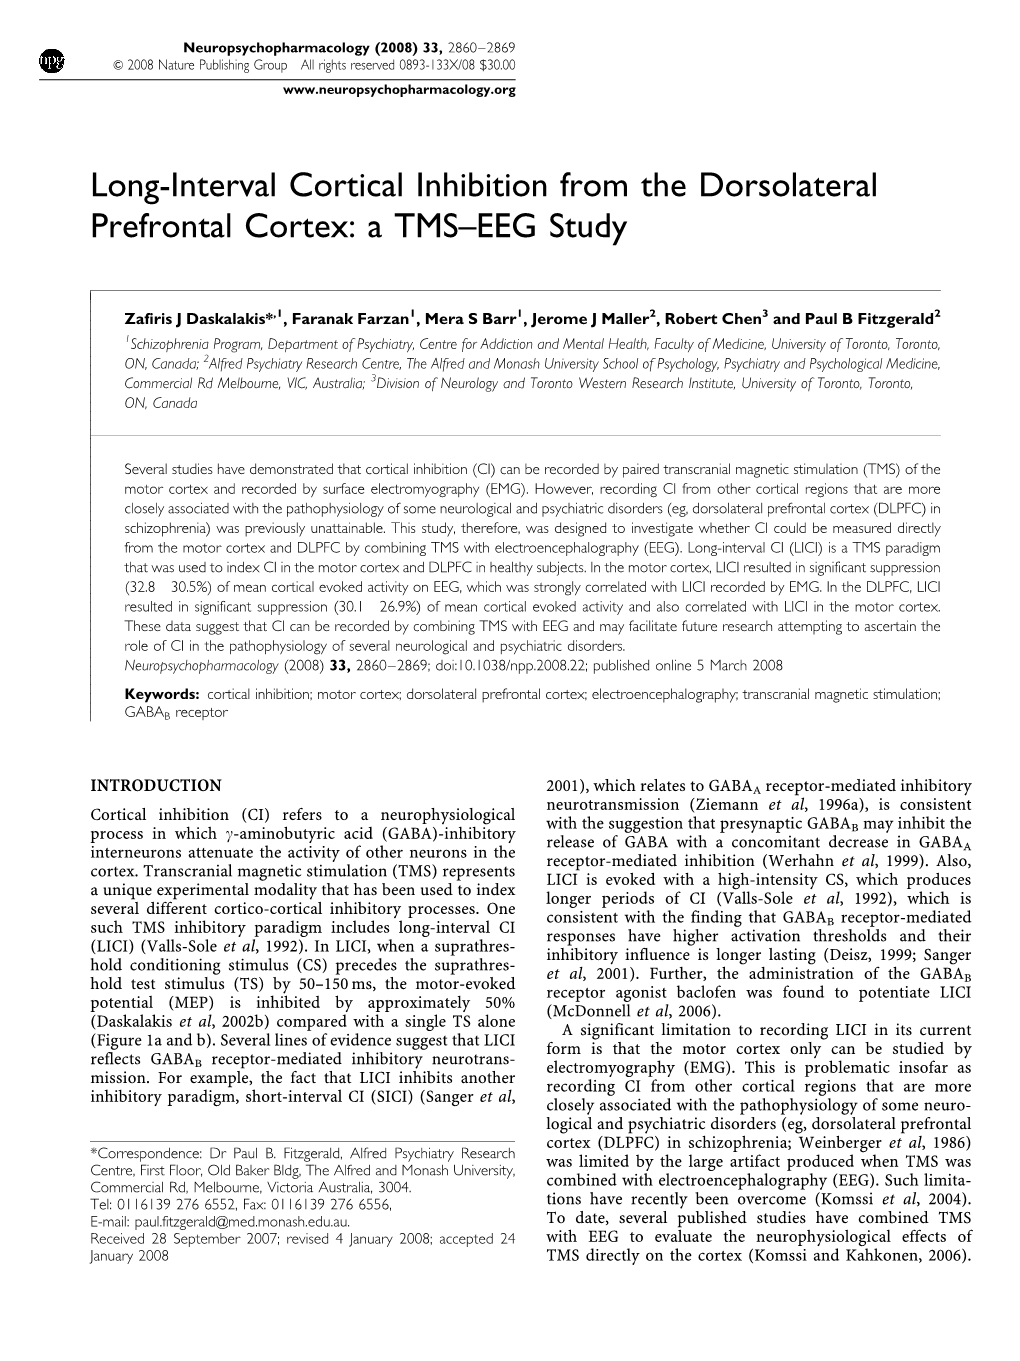 Long-Interval Cortical Inhibition from the Dorsolateral Prefrontal Cortex: a TMS–EEG Study